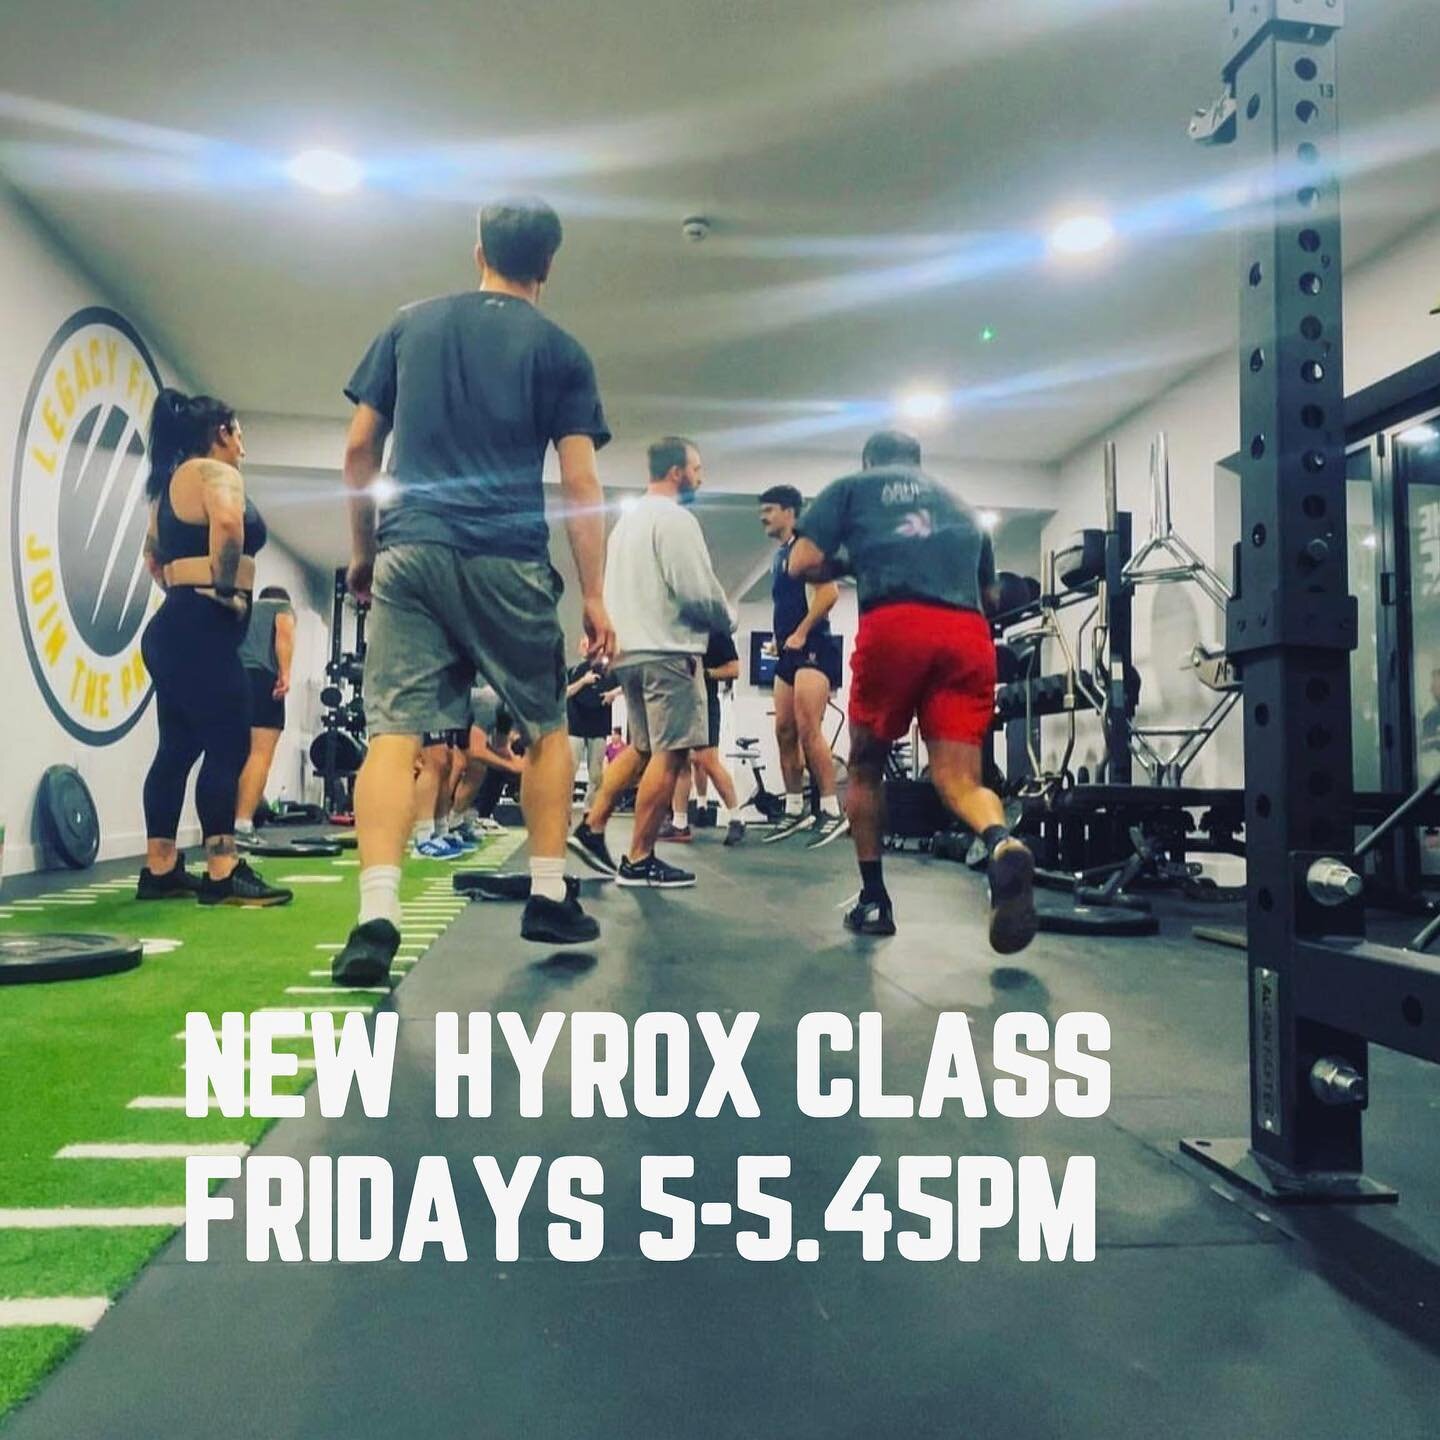 Are you looking to take your training to the next level?

Hyrox competitions are the biggest mass participation event, designed to give everyday gym goers their own race to train for, creating goals and purpose for their training.

It doesn&rsquo;t m